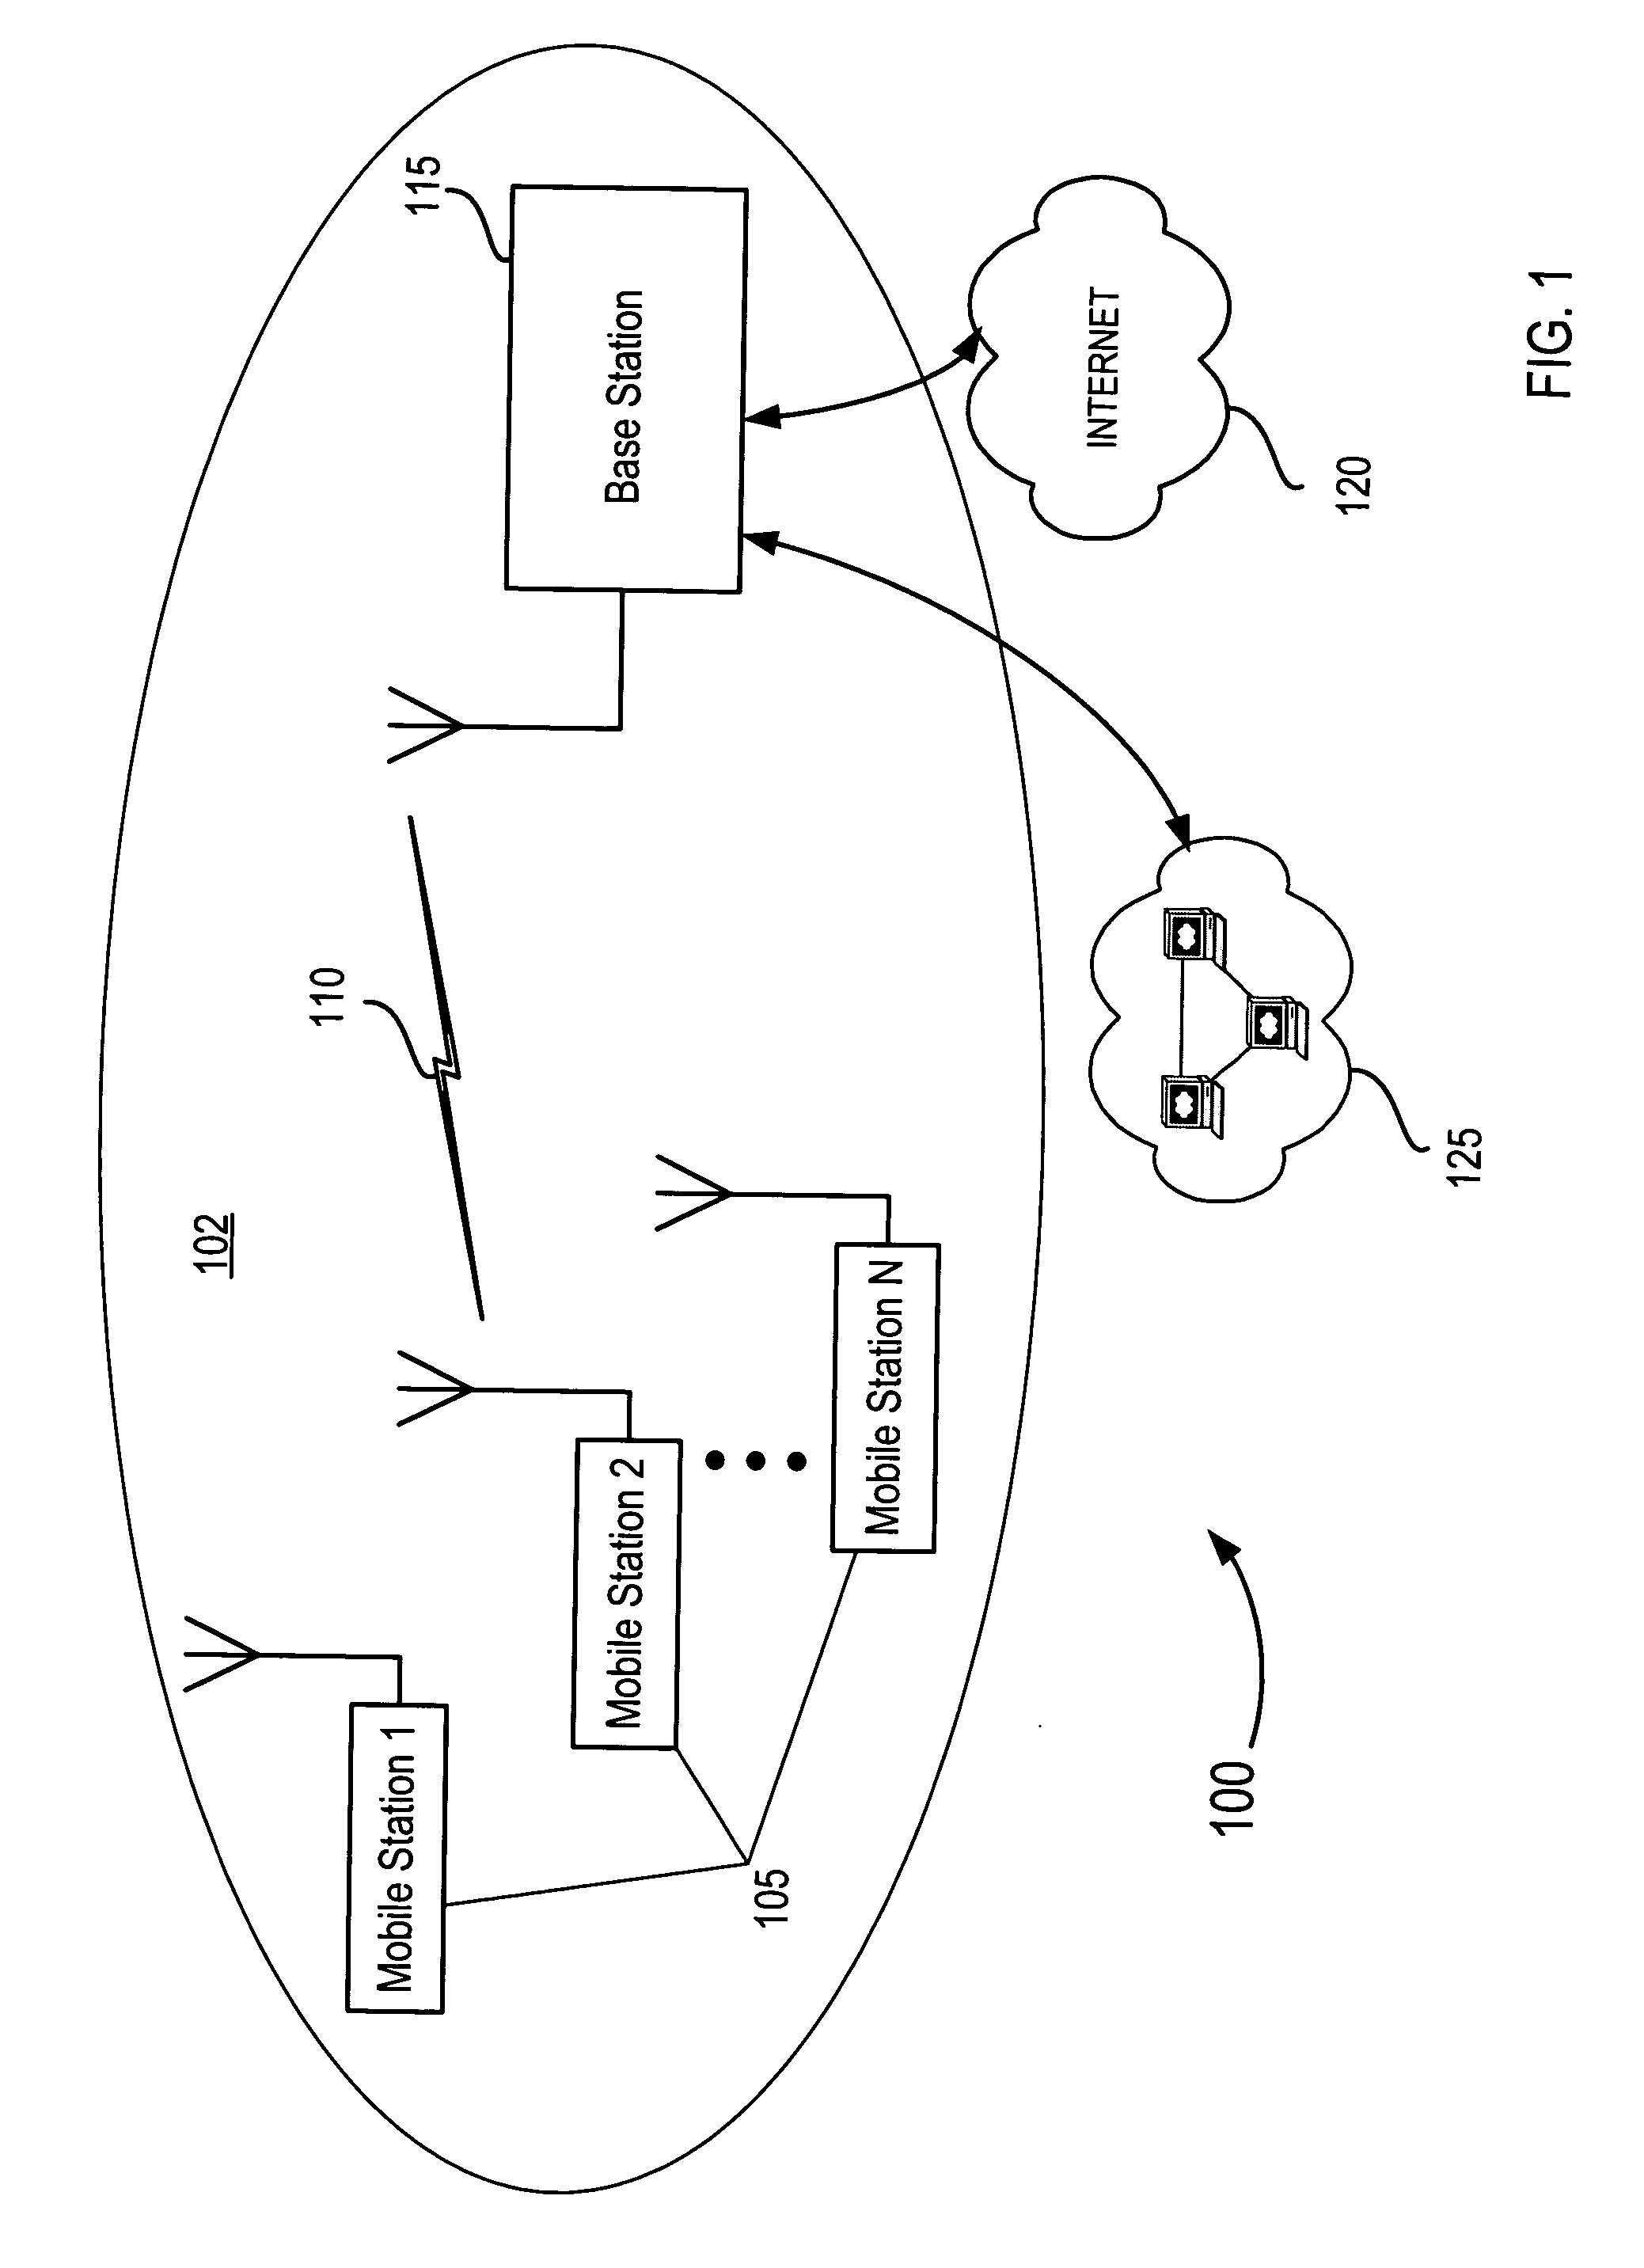 Method of interference cancellation in communication systems